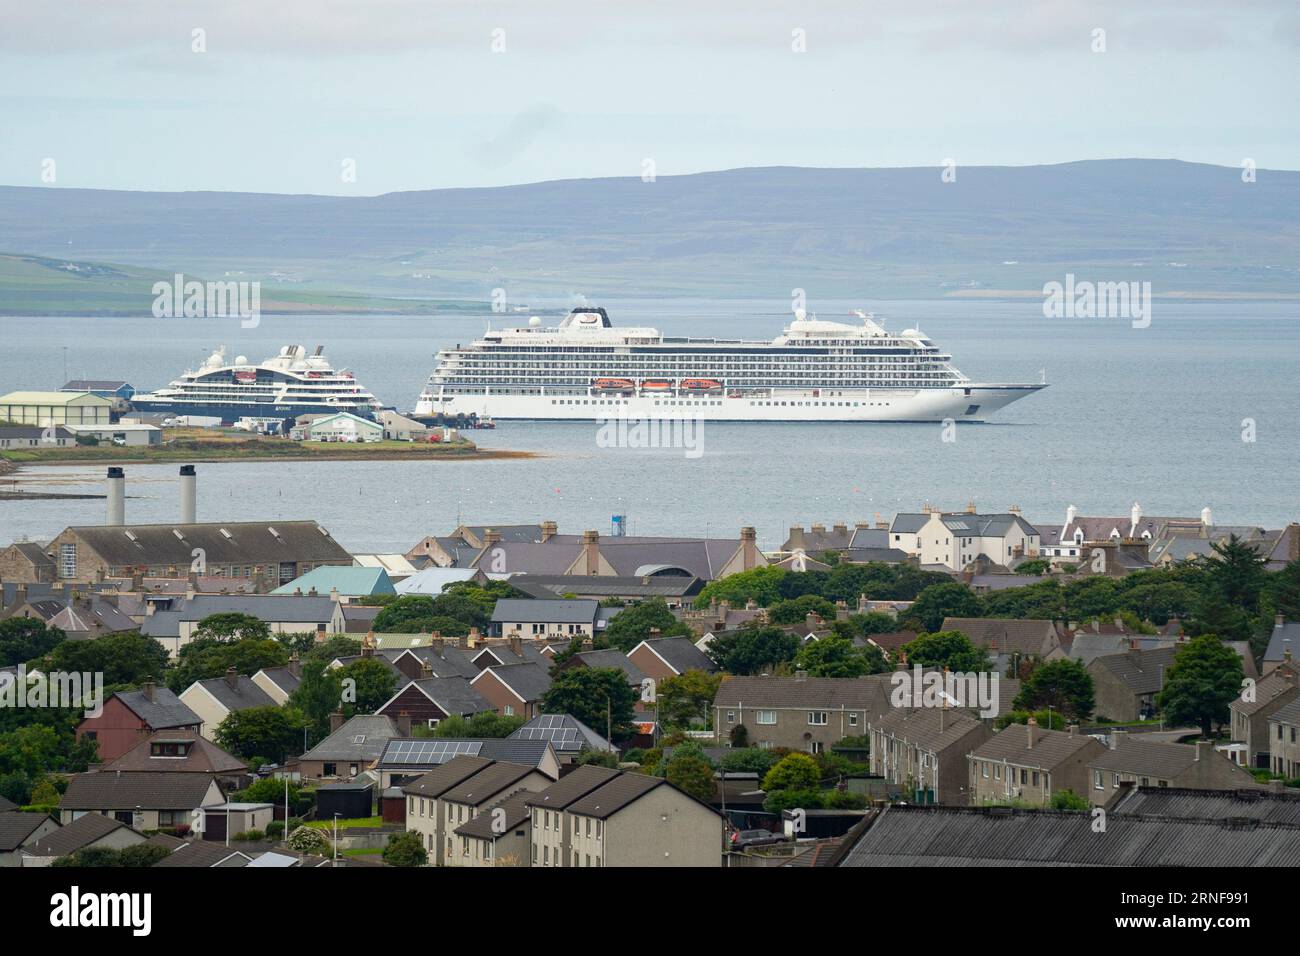 Stromness, Orkney,  Scotland, UK. 1st September 2023. American tourists from visiting cruise ships berthed at Kirkwall visit the Ring of Brodgar neolithic standing stone circle on Orkney. Concerns have been raised by locals that cruise ships are bringing too many tourists to the Islands and current infrastructure cannot cope. Pic; Cruise ships in Kirkwall port. Iain Masterton/Alamy Live News Stock Photo